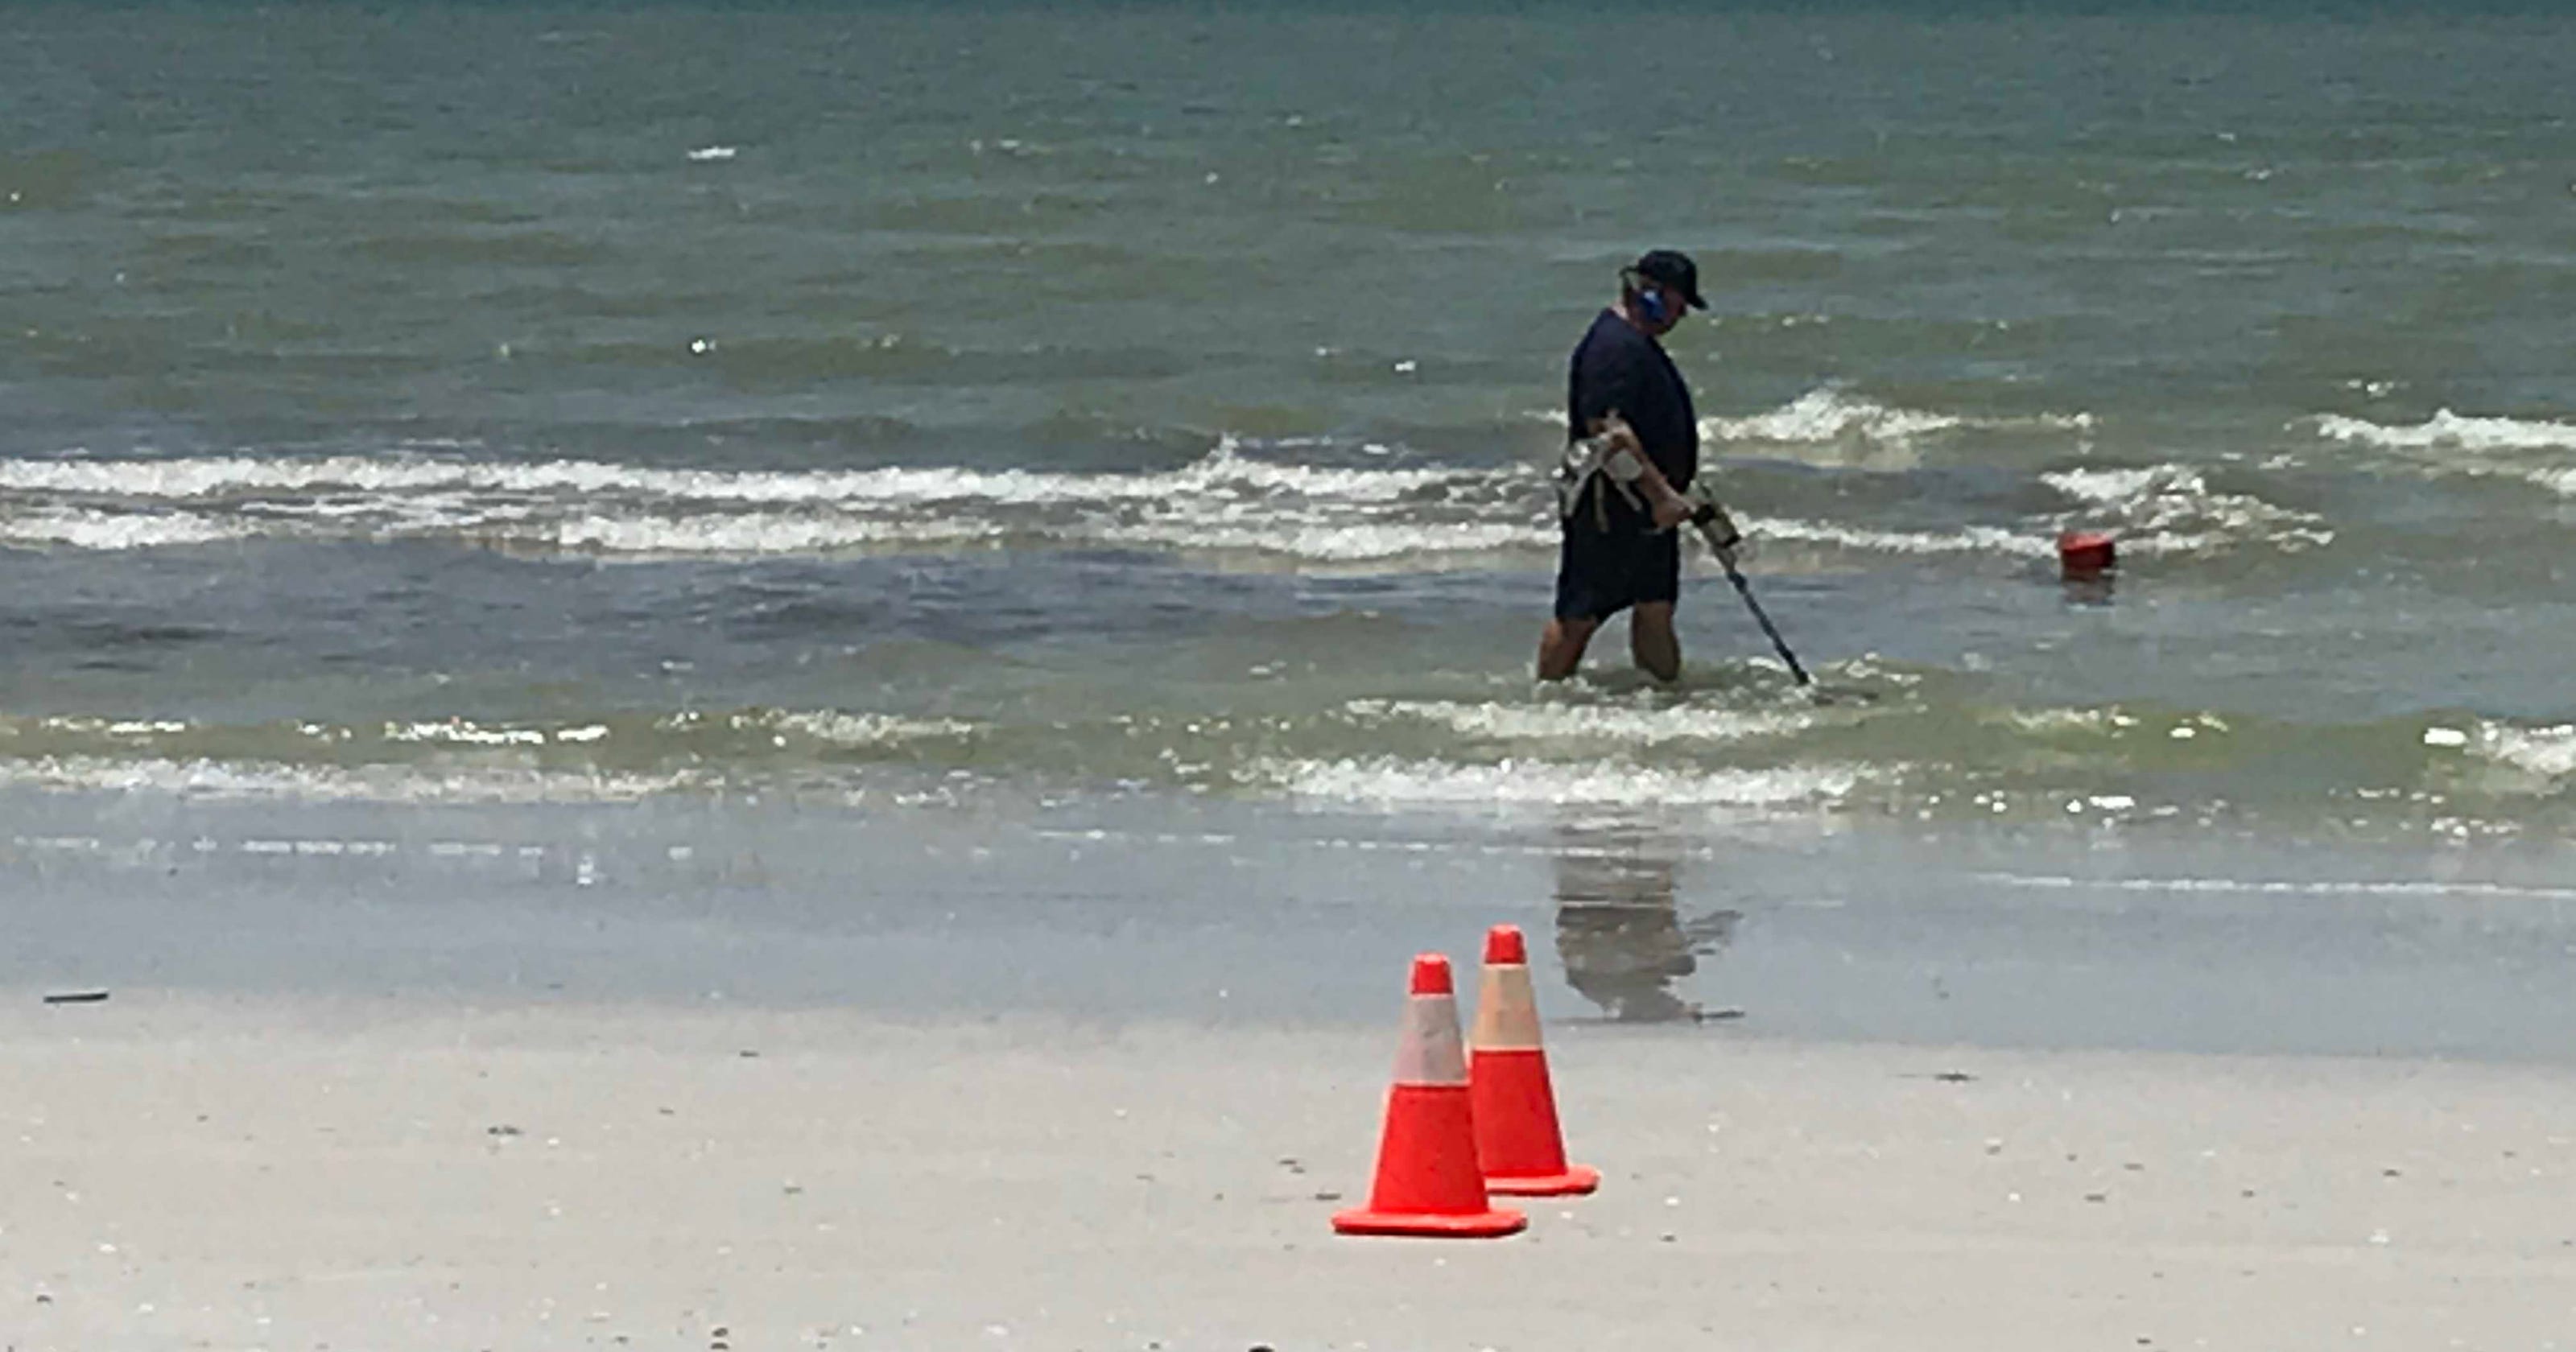 Law enforcement scours beach after an apparent body washed ashore